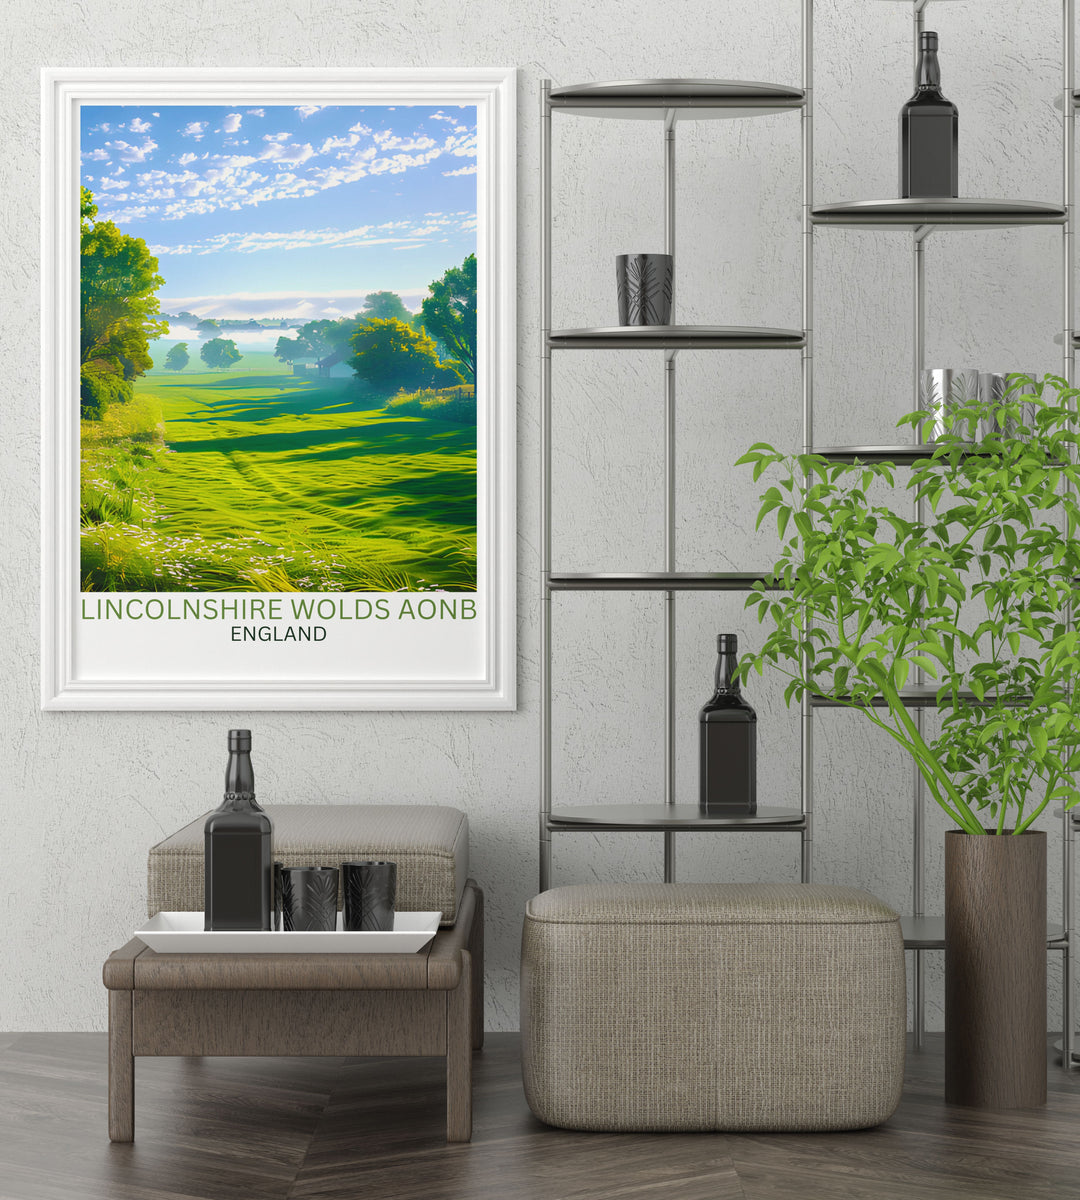 Travel poster of Lincolnshire Wolds, inspiring exploration and admiration of Englands natural landscapes.